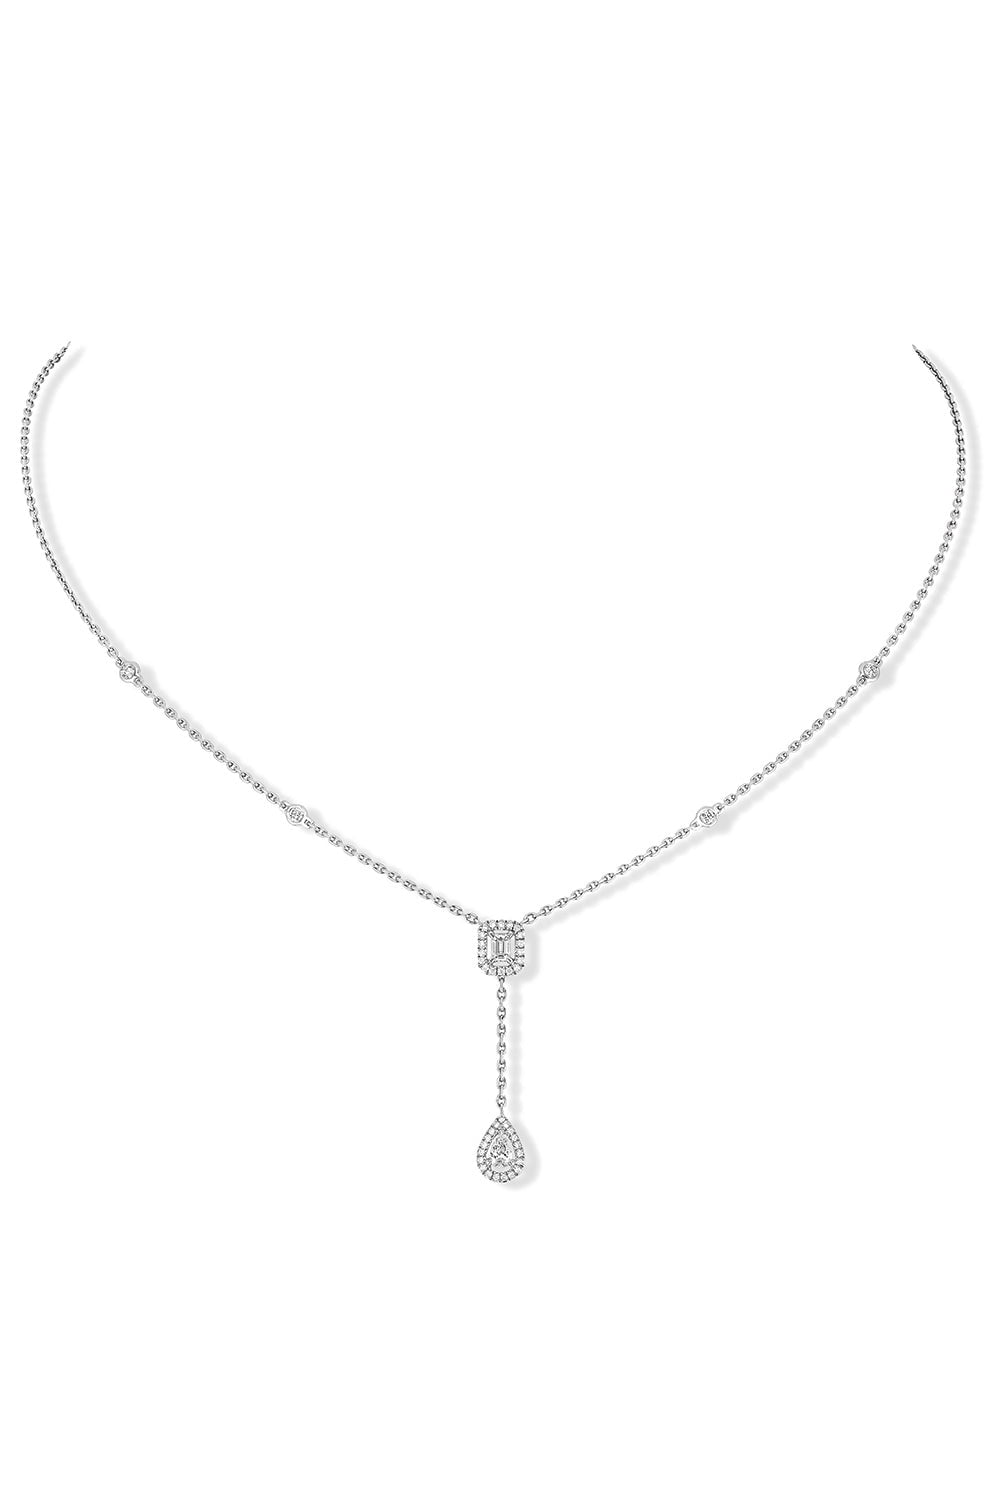 MESSIKA-My Twin Tie Necklace-WHITE GOLD